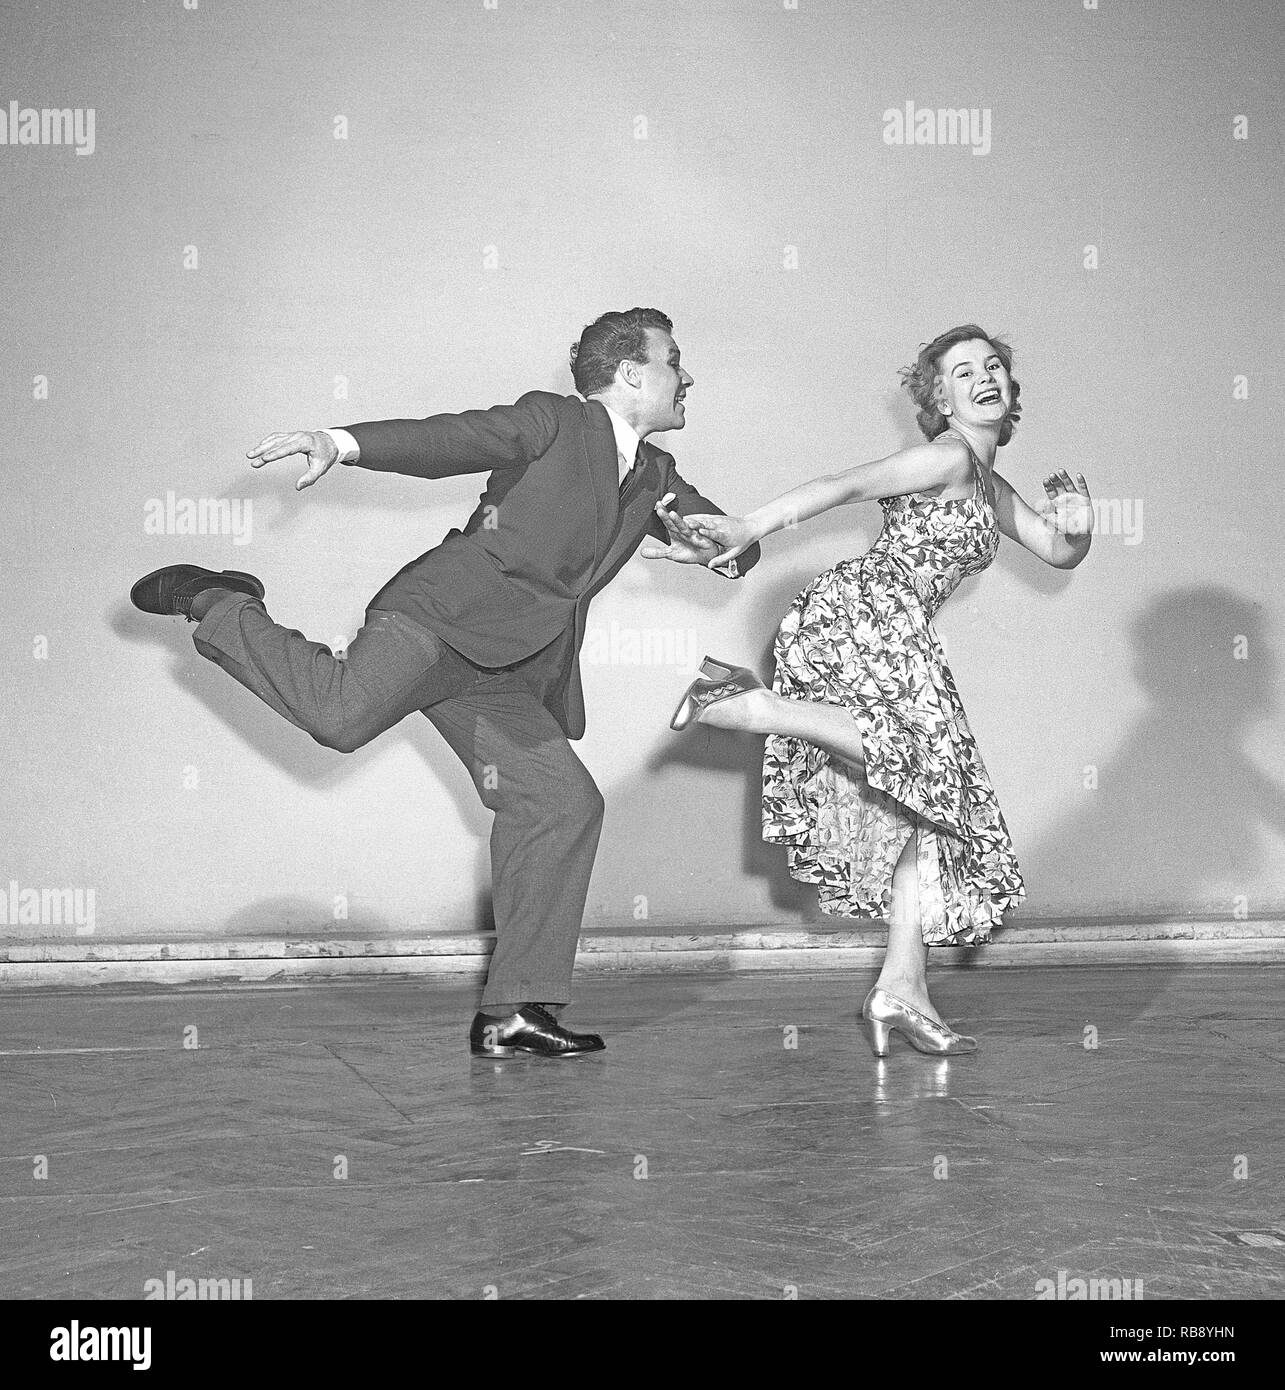 Charleston dance. A Dance named for the harbor city of Charleston, South Carolina and was popularized in the United States by a 1923 tune called The Charleston. The peak for the Charleston as a dance by the public was mid 1926 to 1927. Pictured Sonja Stjernquist and John Ivar Deckner dancing the Charleston 1950.  Photo Kristoffersson ref BA68-5 Stock Photo